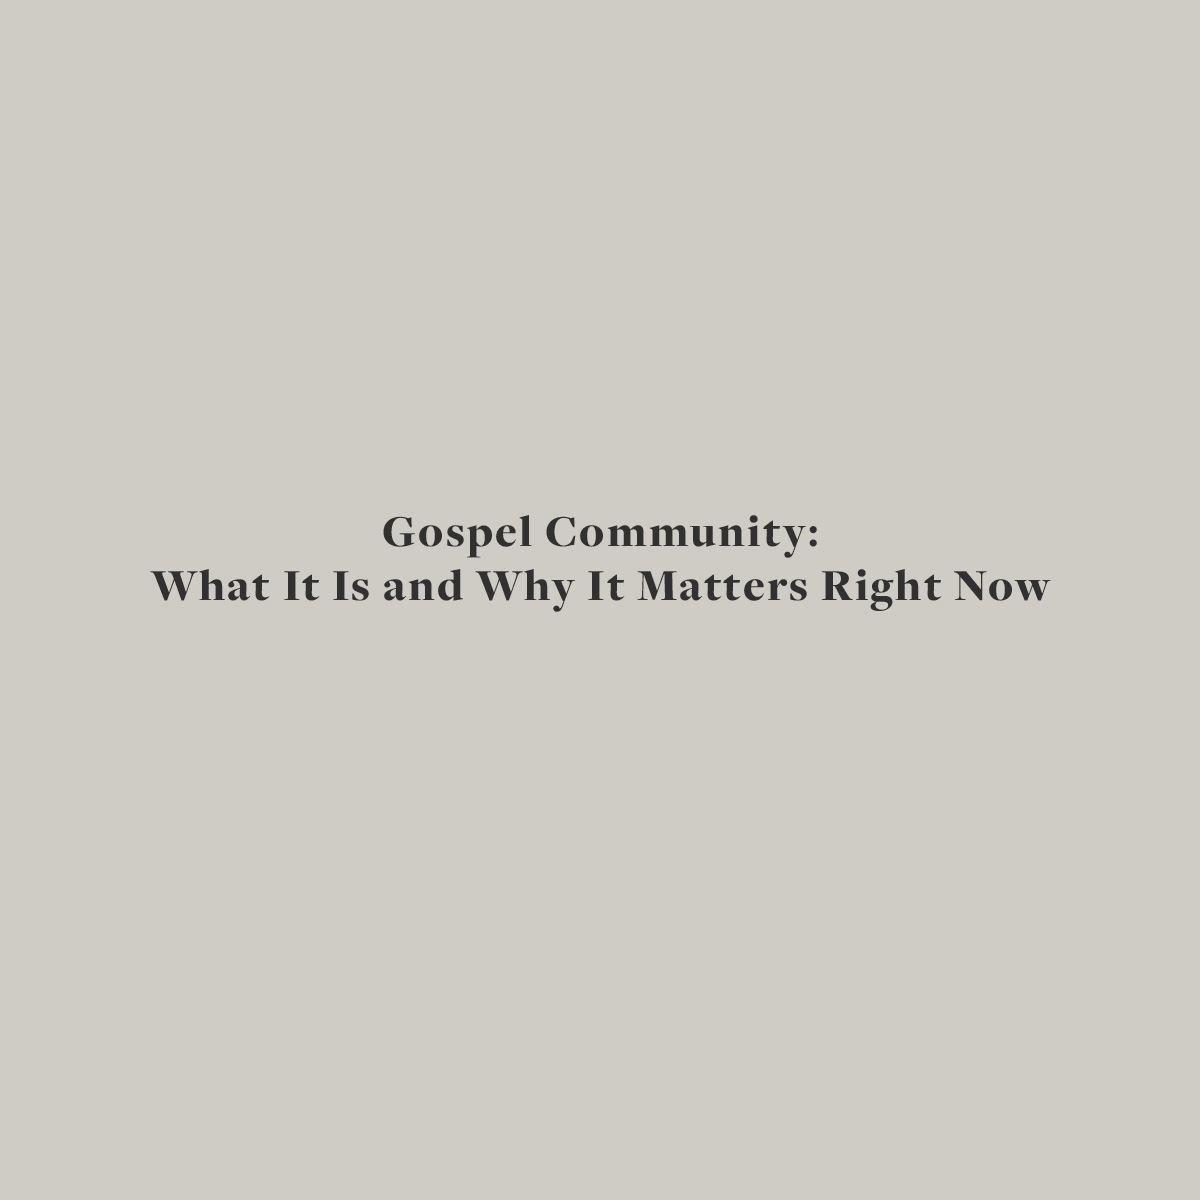 Gospel Community: What It Is and Why It Matters Right Now